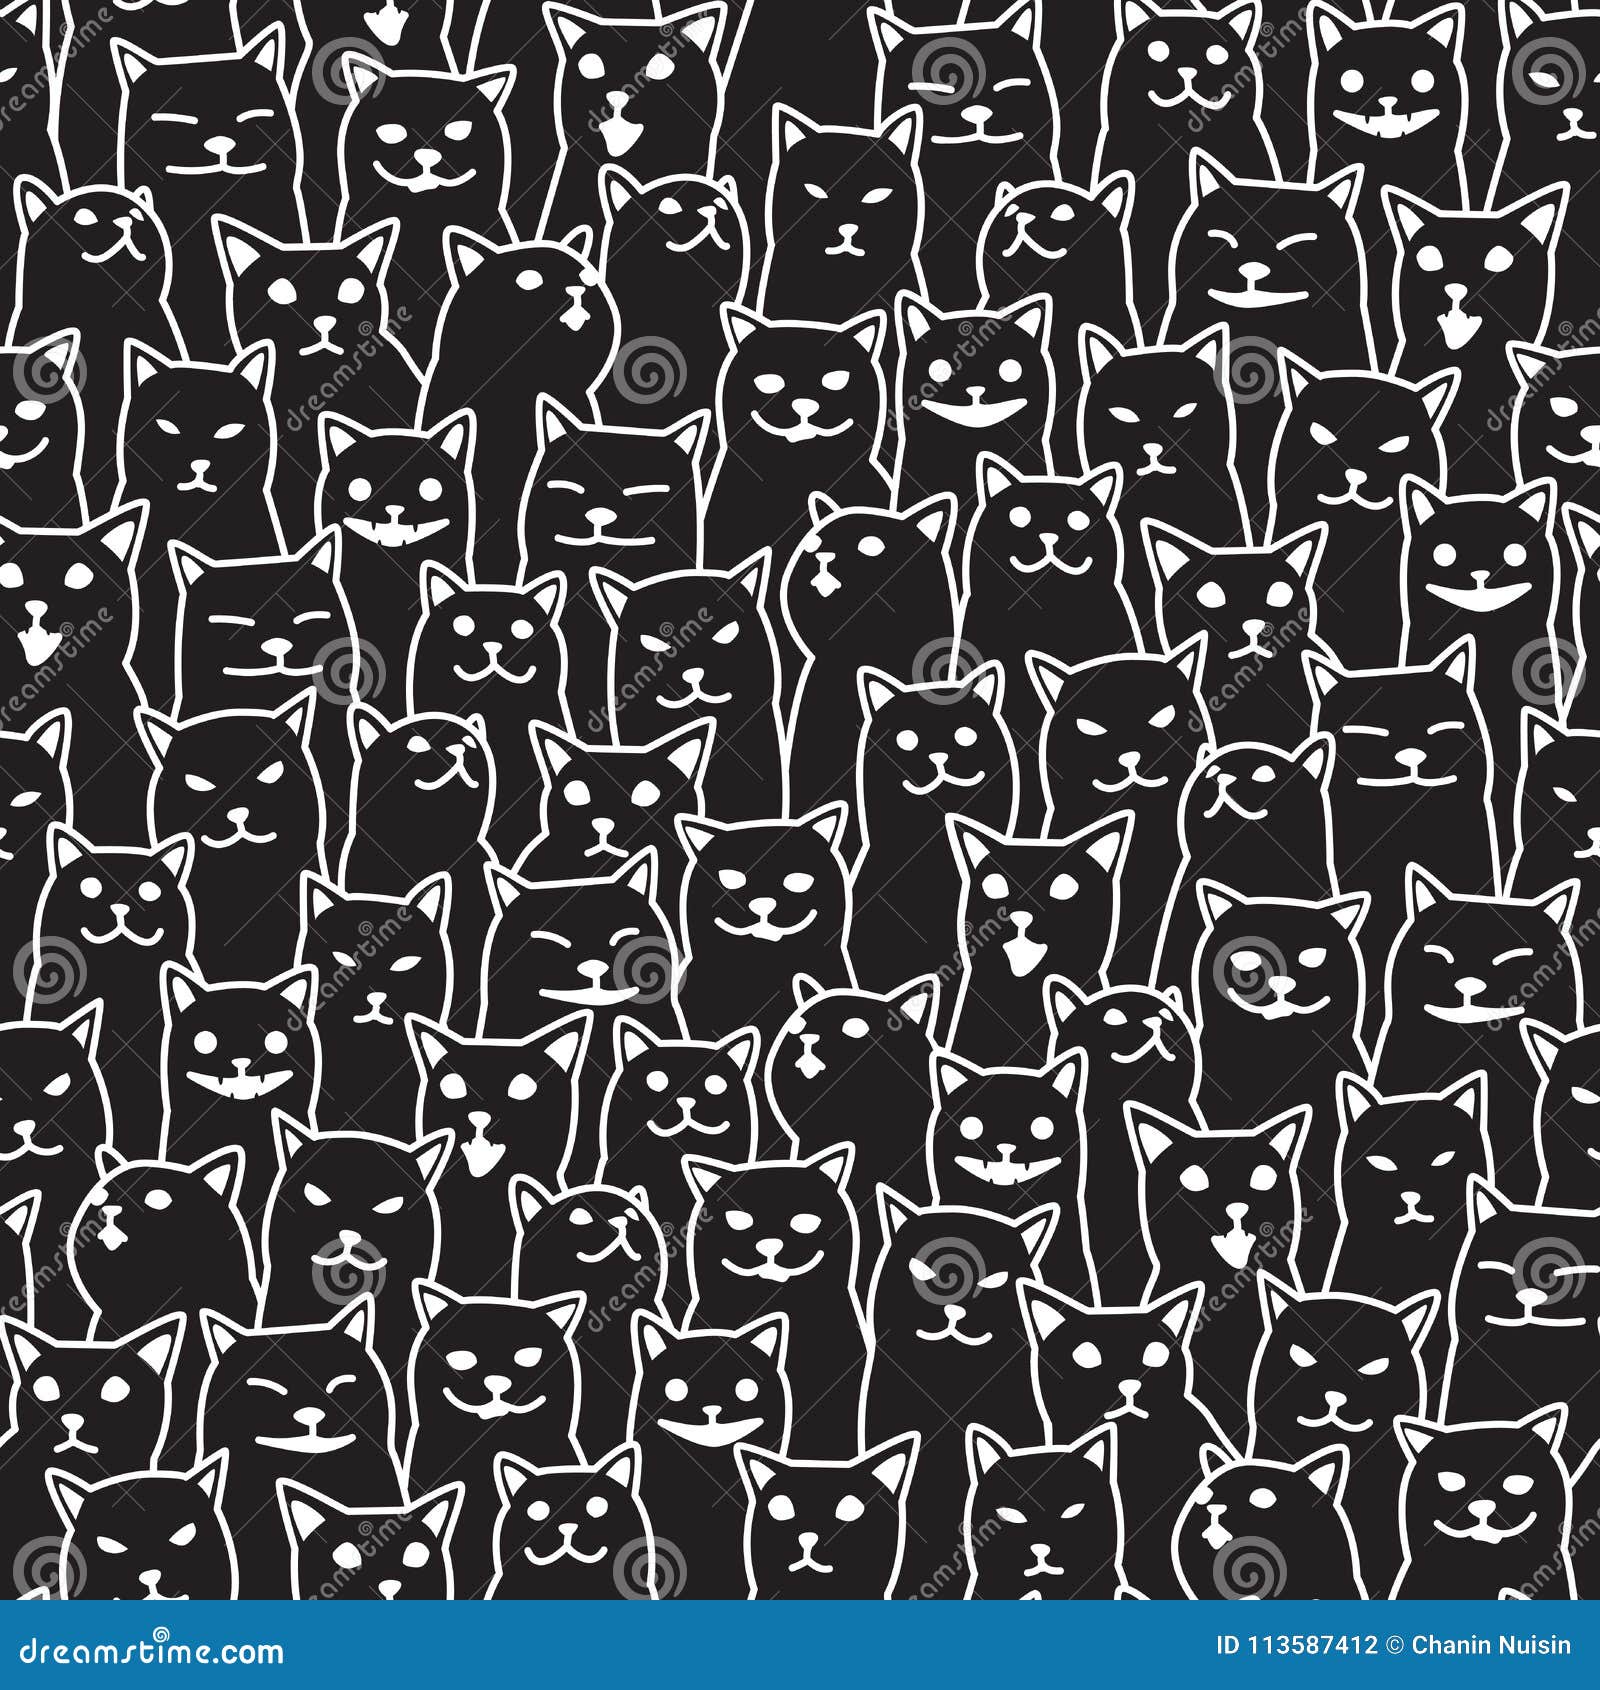 Cat Kitten Breed Doodle Vector Seamless Pattern Isolated Wallpaper  Background Black Stock Vector - Illustration of calico, fabric: 113587412